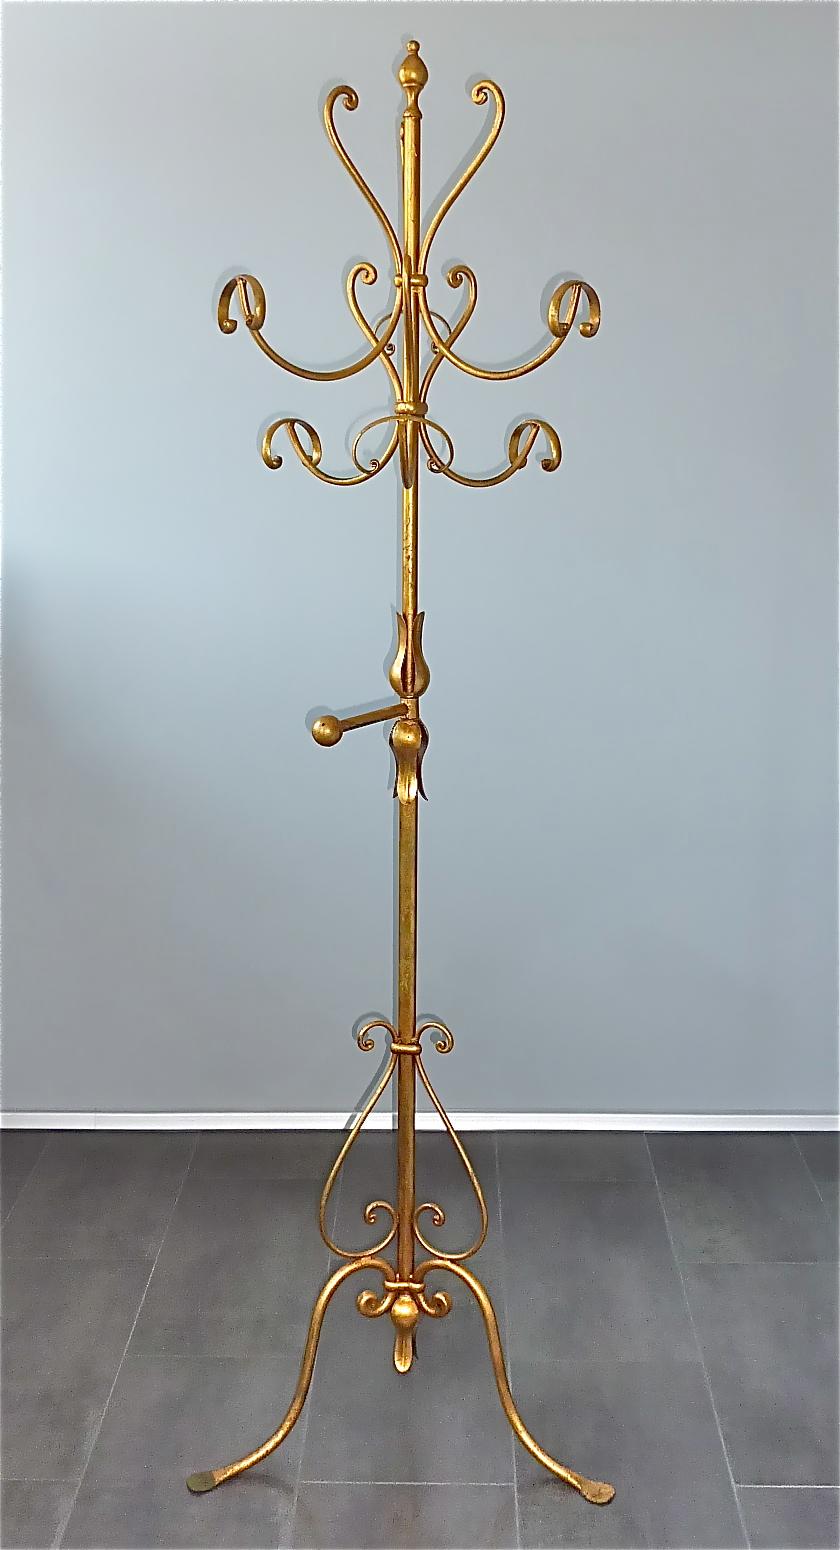 A gorgeous Italian midcentury gilt wrought iron metal coat stand or hat rack in the style of Hans Kögl, Italy, circa 1950s. The coat stand which has an upper width of about 43 cm / 16.93 inches and a lower stand width of 60 cm / 23.62 inches and